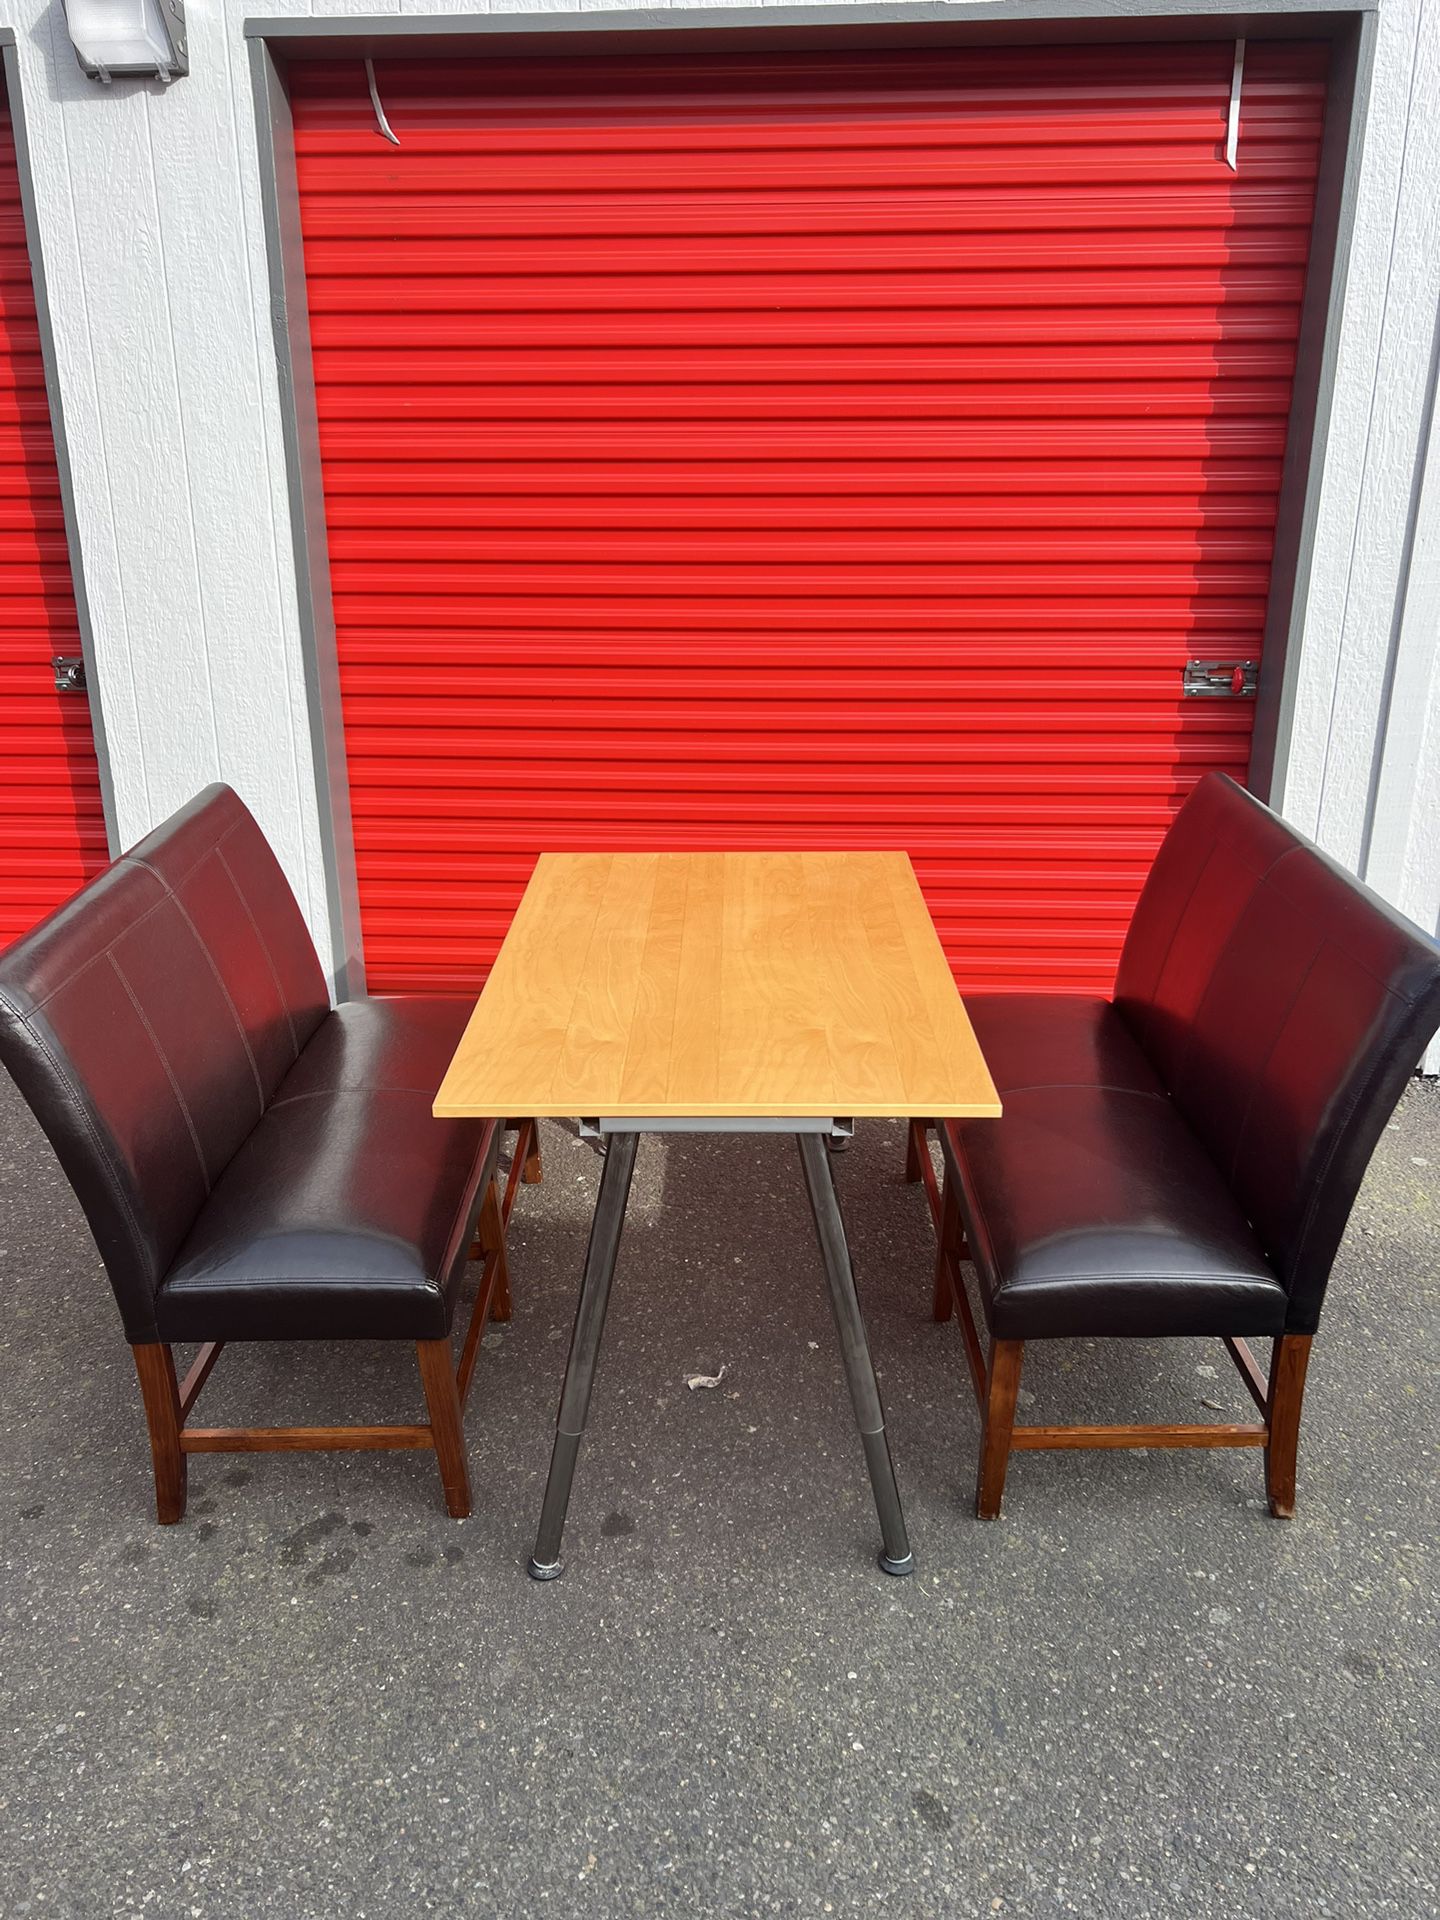 *Free Delivery* Adjustable Height Table + Bench Seats